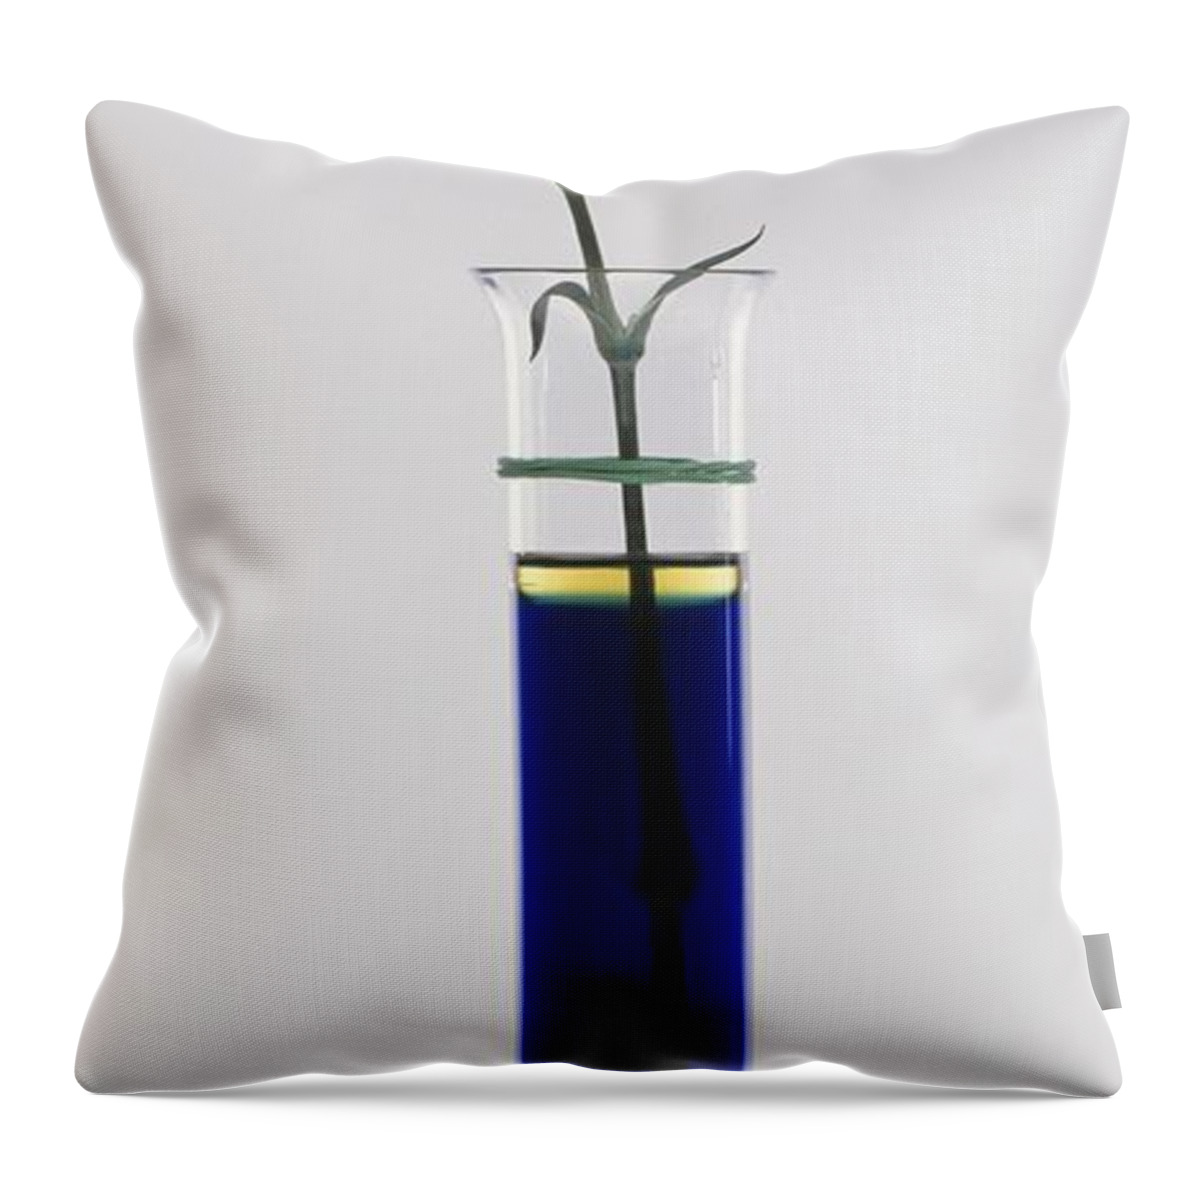 Blue Throw Pillow featuring the photograph White Carnation Absorbing by Peter Gardner / Dorling Kindersley